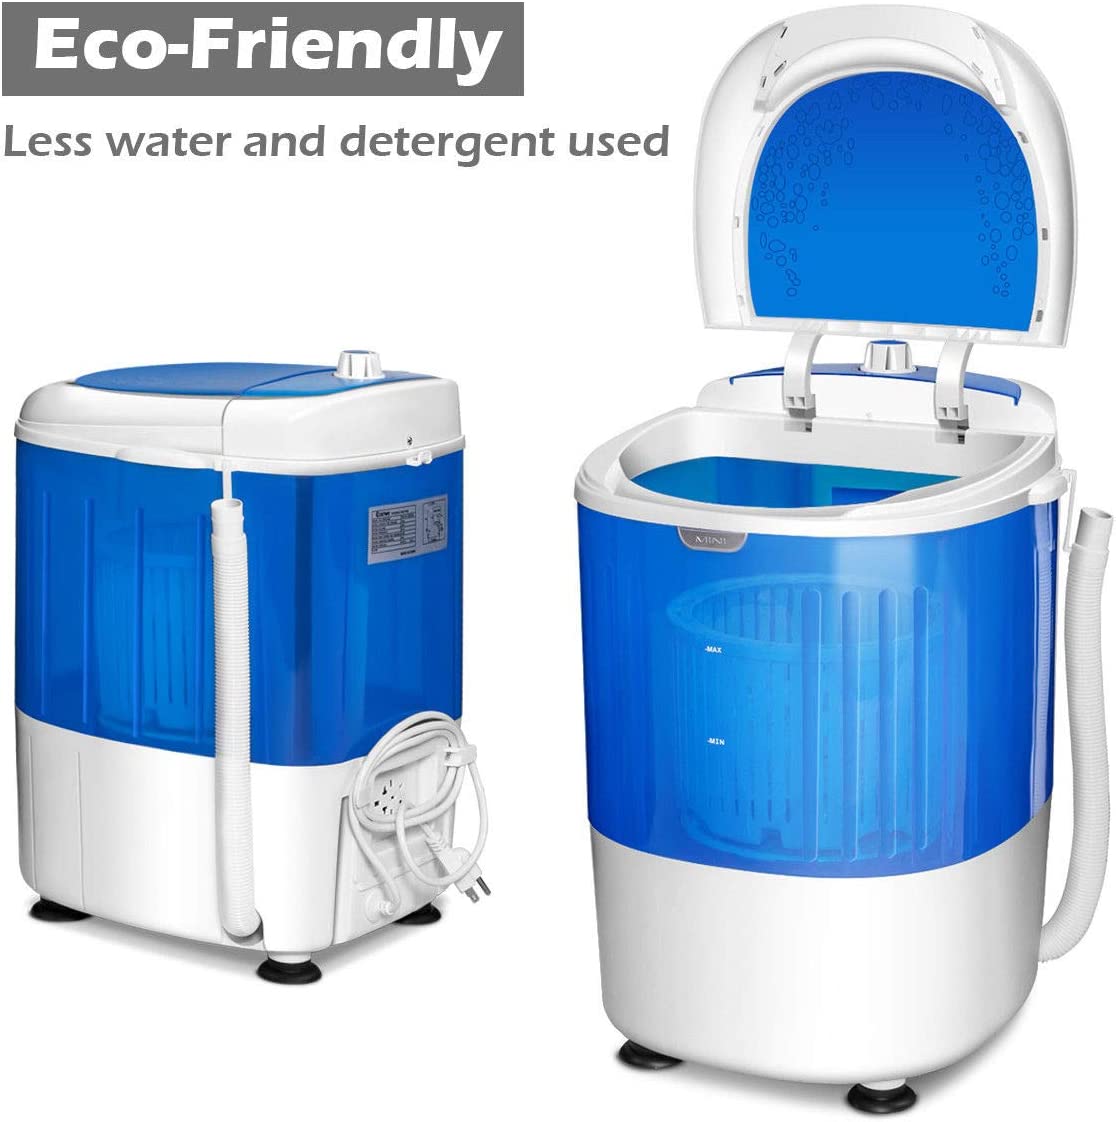 COSTWAY Portable Mini Washing Machine with Spin Dryer, Washing Capacity  5.5lbs, Electric Compact Machines Durable Design Energy Saving, Rotary  Controller, Laundry Washer for Home Apartment RV, Blue